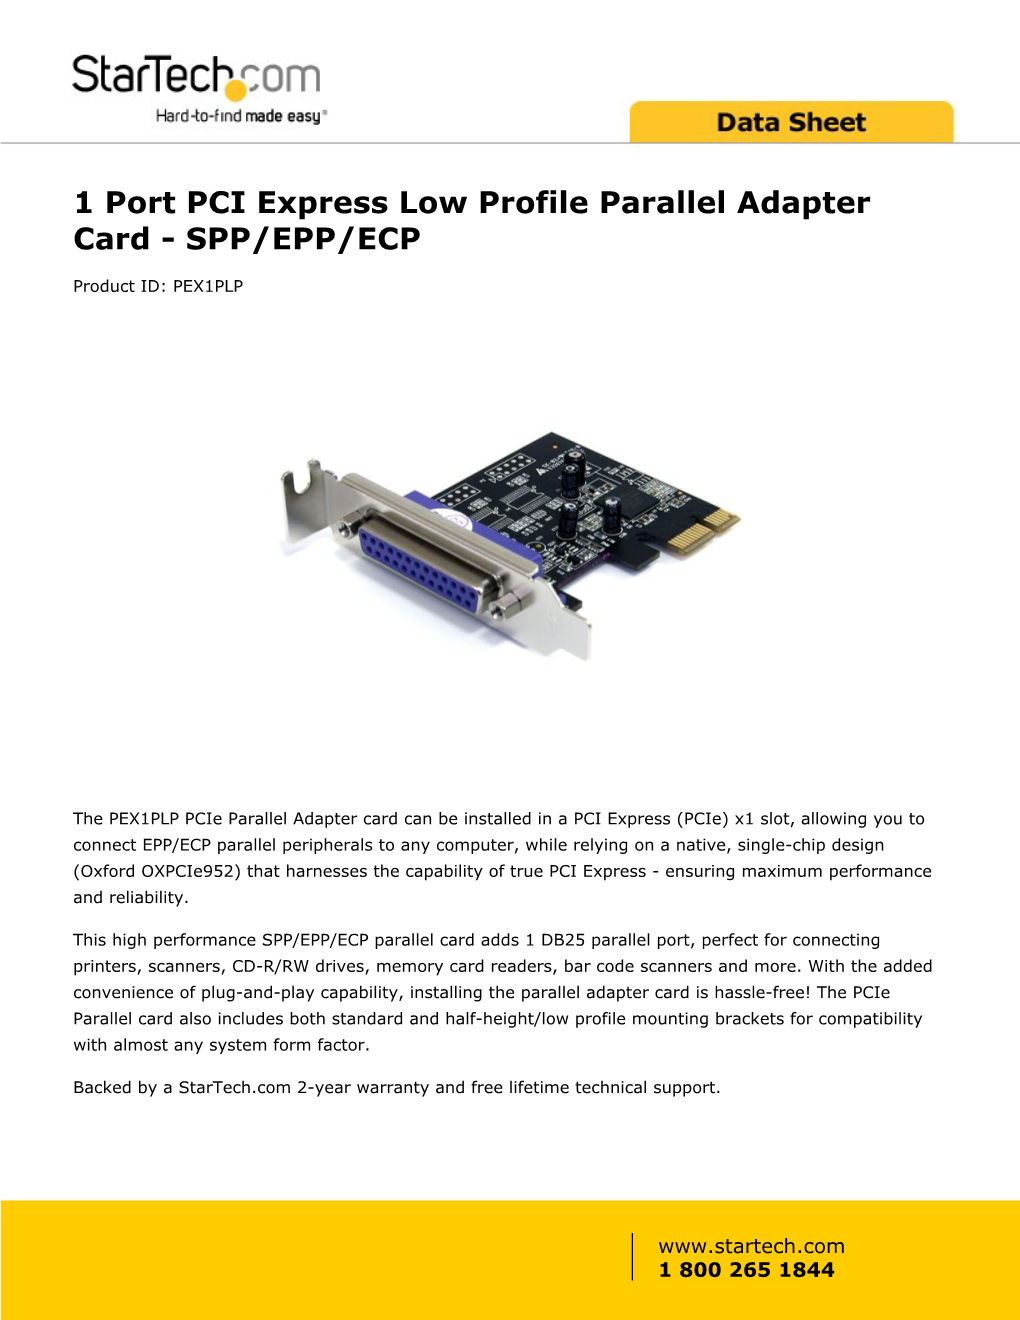 1 Port PCI Express Low Profile Parallel Adapter Card - SPP/EPP/ECP